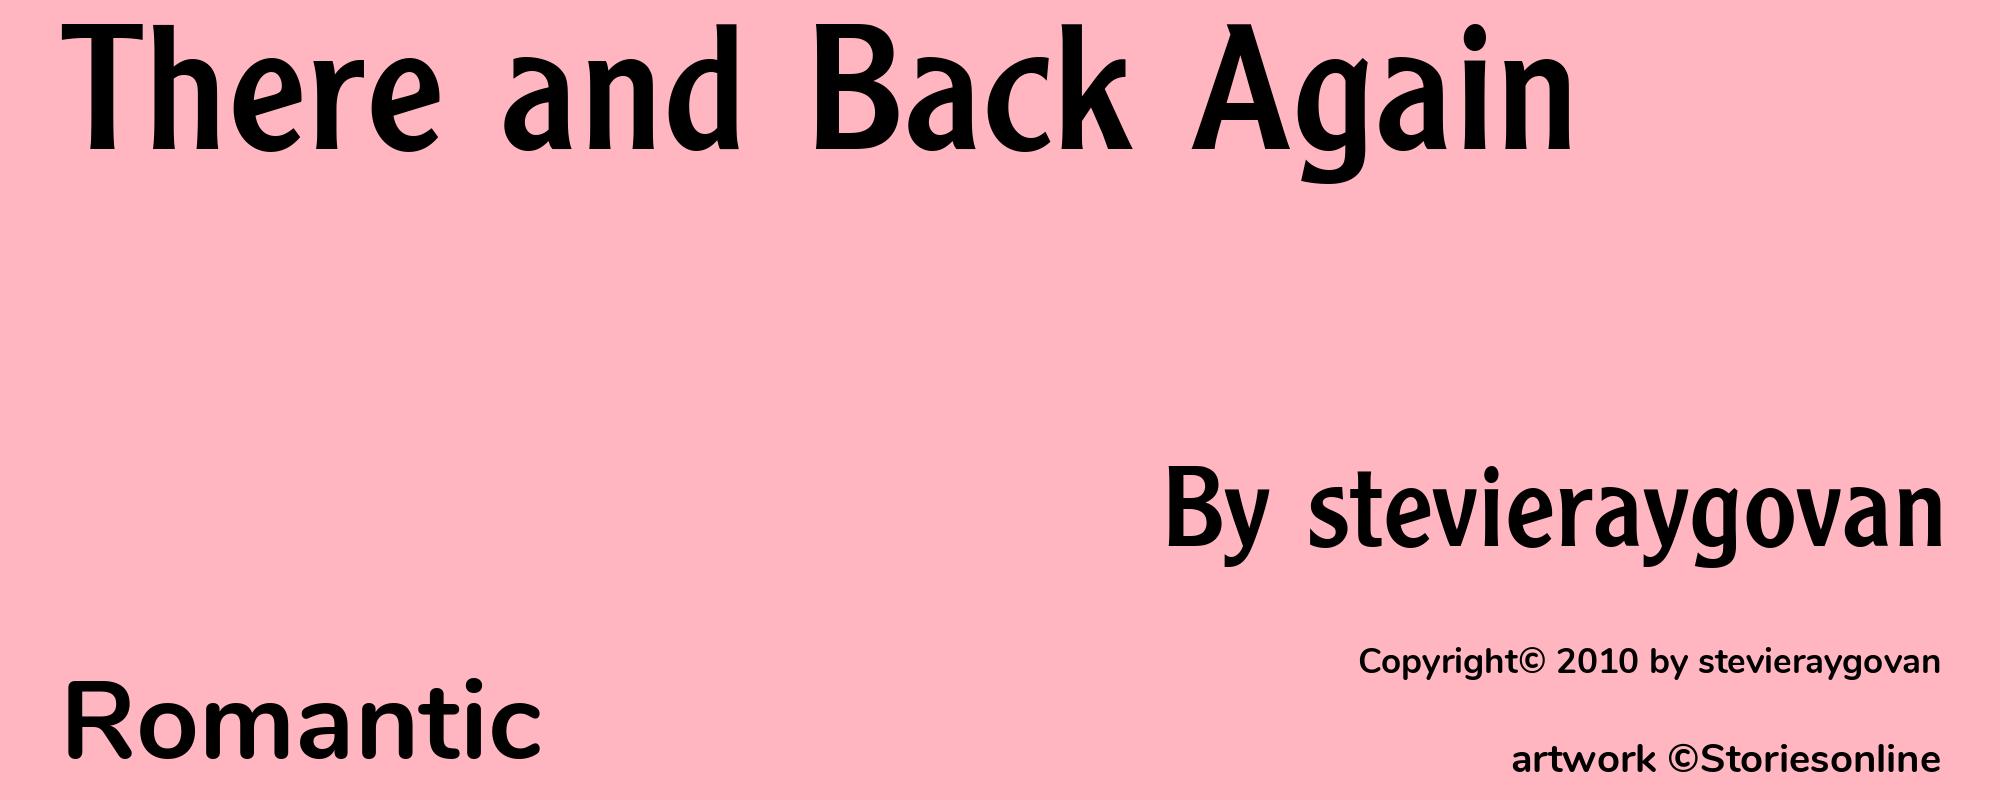 There and Back Again - Cover